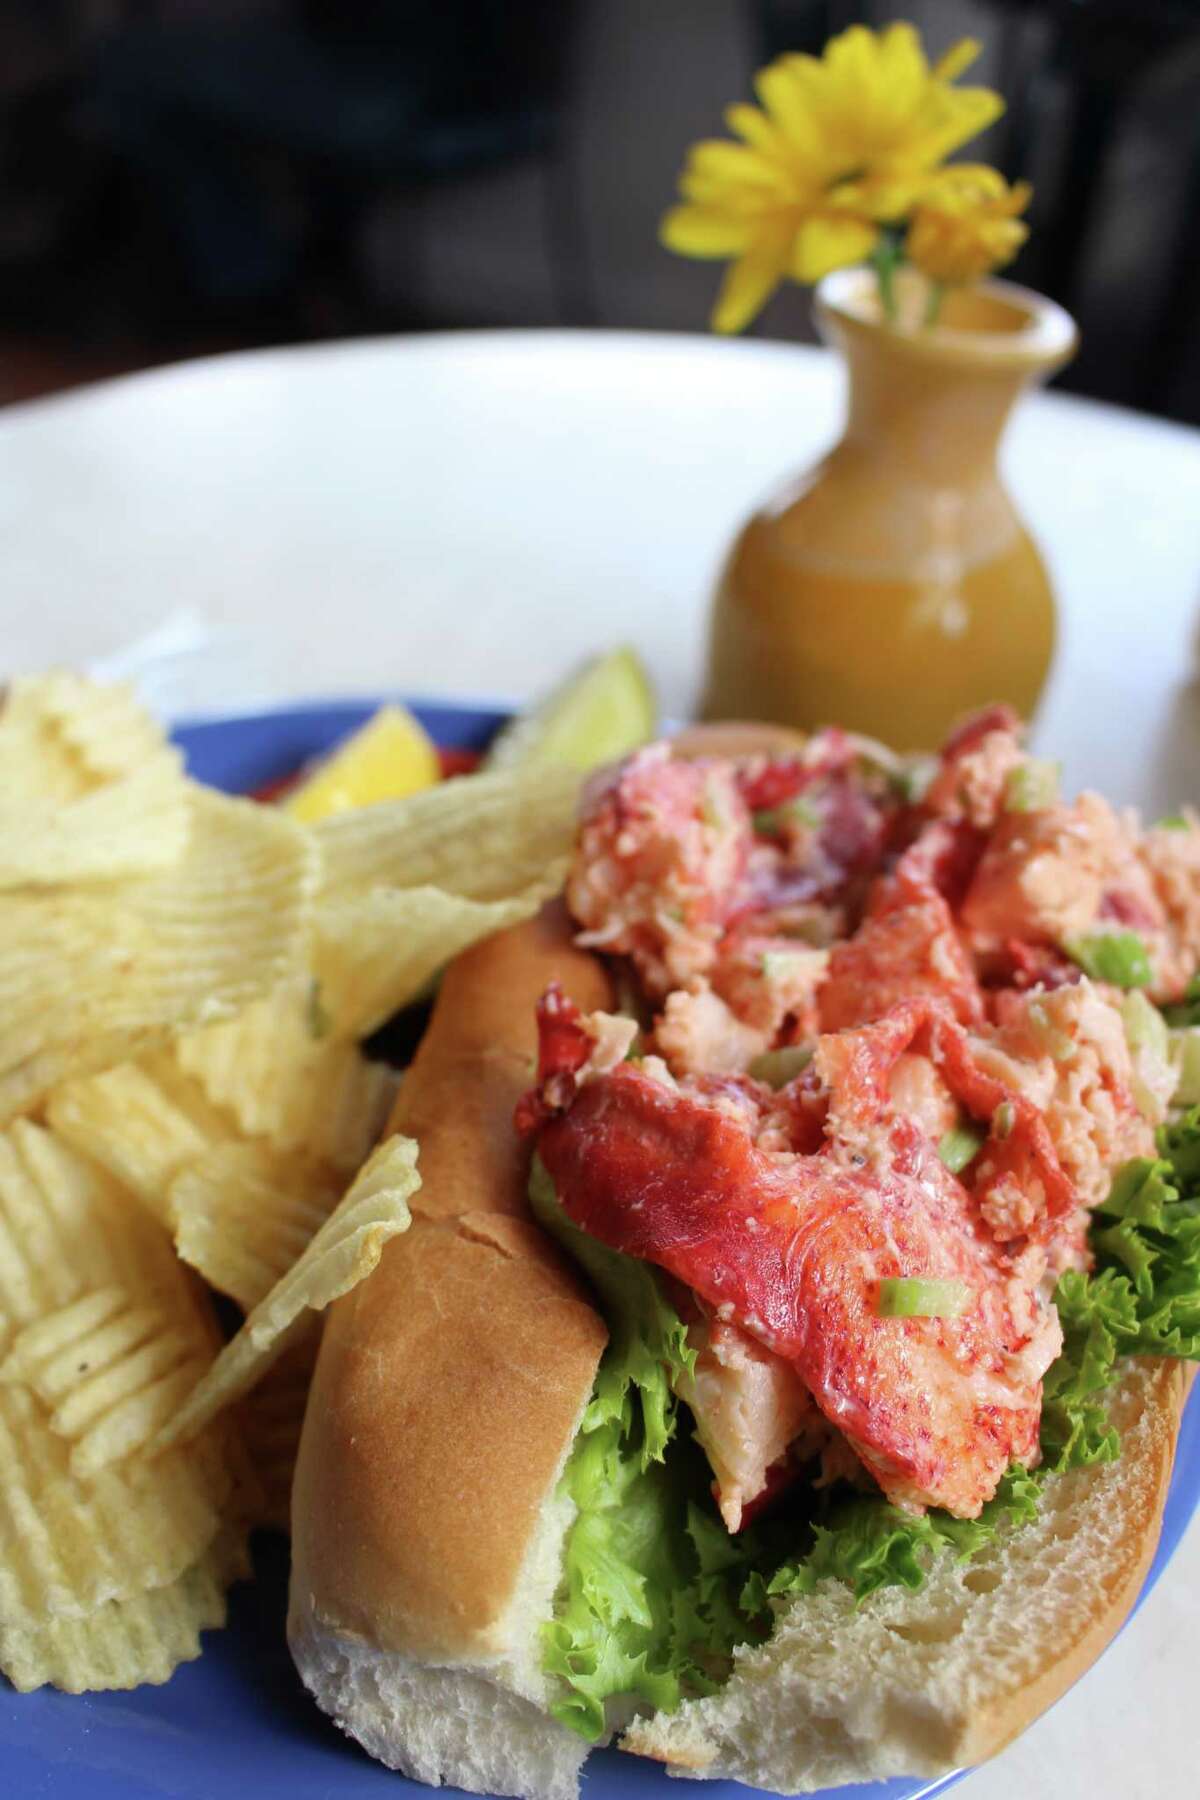 The lobster roll -- a favorite in this part of the world, including Martha's Vineyard -- at Among the Flowers Cafe, a little place near the ferry landing at Edgartown, Mass.